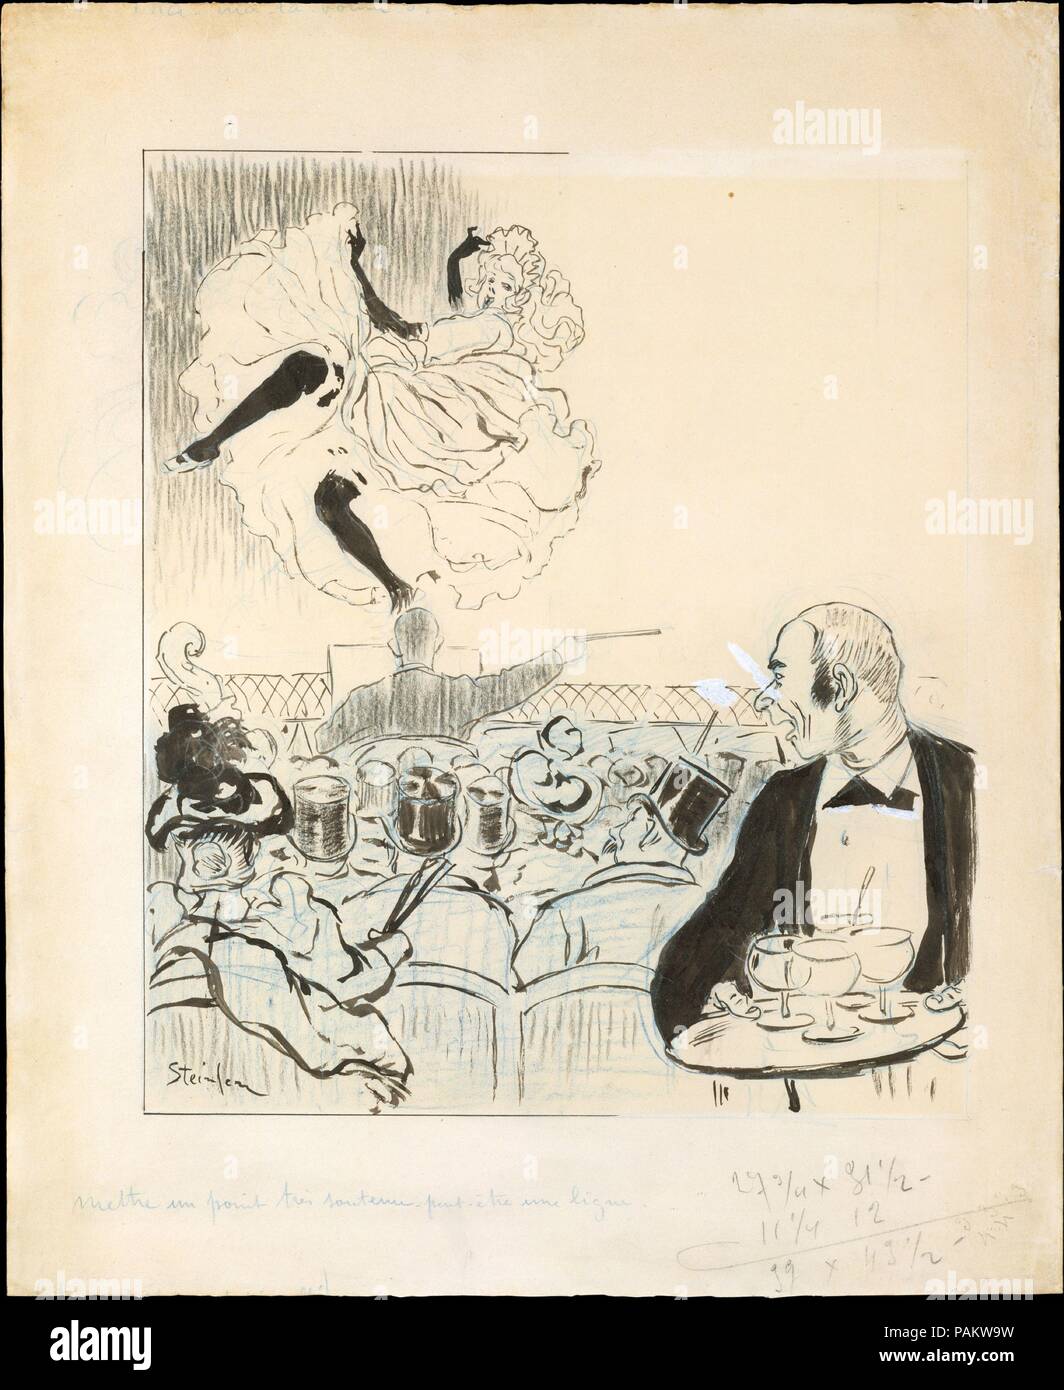 Dancer at a Café Concert. Artist: Théophile-Alexandre Steinlen (French (born Switzerland), Lausanne 1859-1923 Paris). Dimensions: 17 1/16 x 14 1/8 in.  (43.4 x 35.8 cm). Date: 1892-93.  An illustrator and poster artist, Steinlen's flamboyant imagery of the café concert invites comparison with Henri de Toulouse-Lautrec, his neighbor in Paris.  Steinlen was the principal illustrator of Le Mirliton, a journal published by Aristide Bruant, the owner of a cabaret by the same title.  Steinlen made this drawing as a cover design for the 17 February 1893 issue of the journal, to illustrate the song 'T Stock Photo